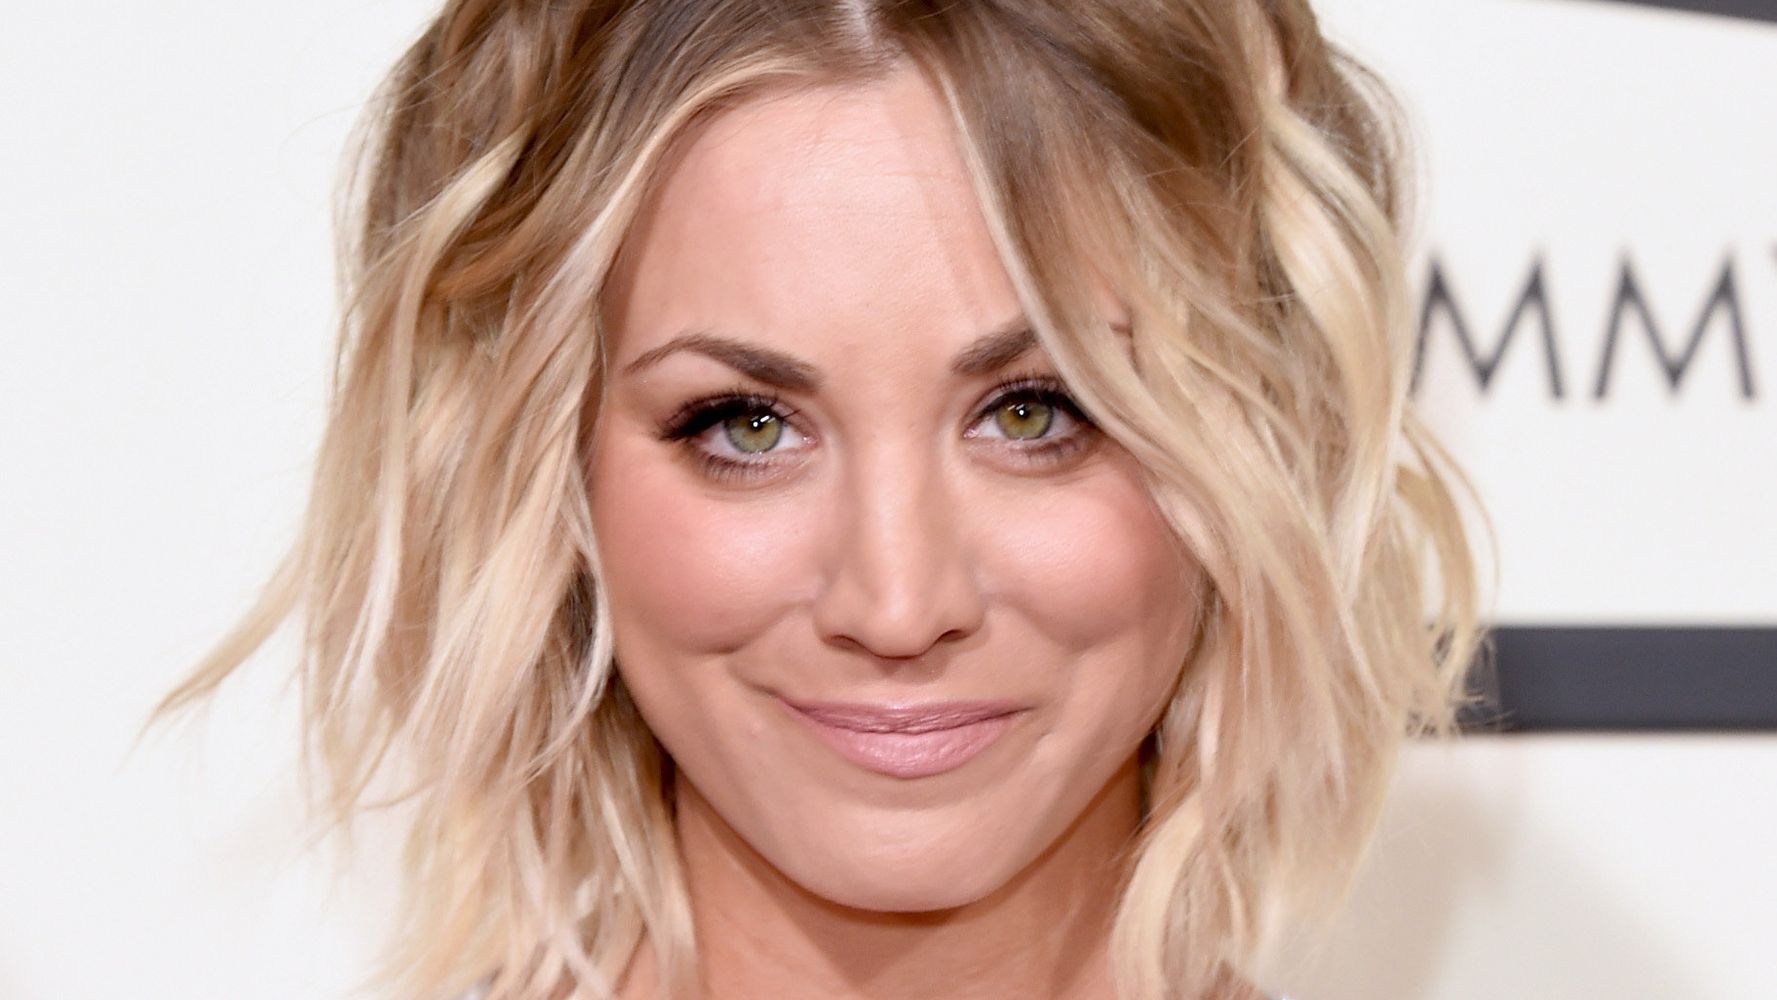 Kaley Cuoco Looks Glamorous In Sleek, Sparkly Jumpsuit At 